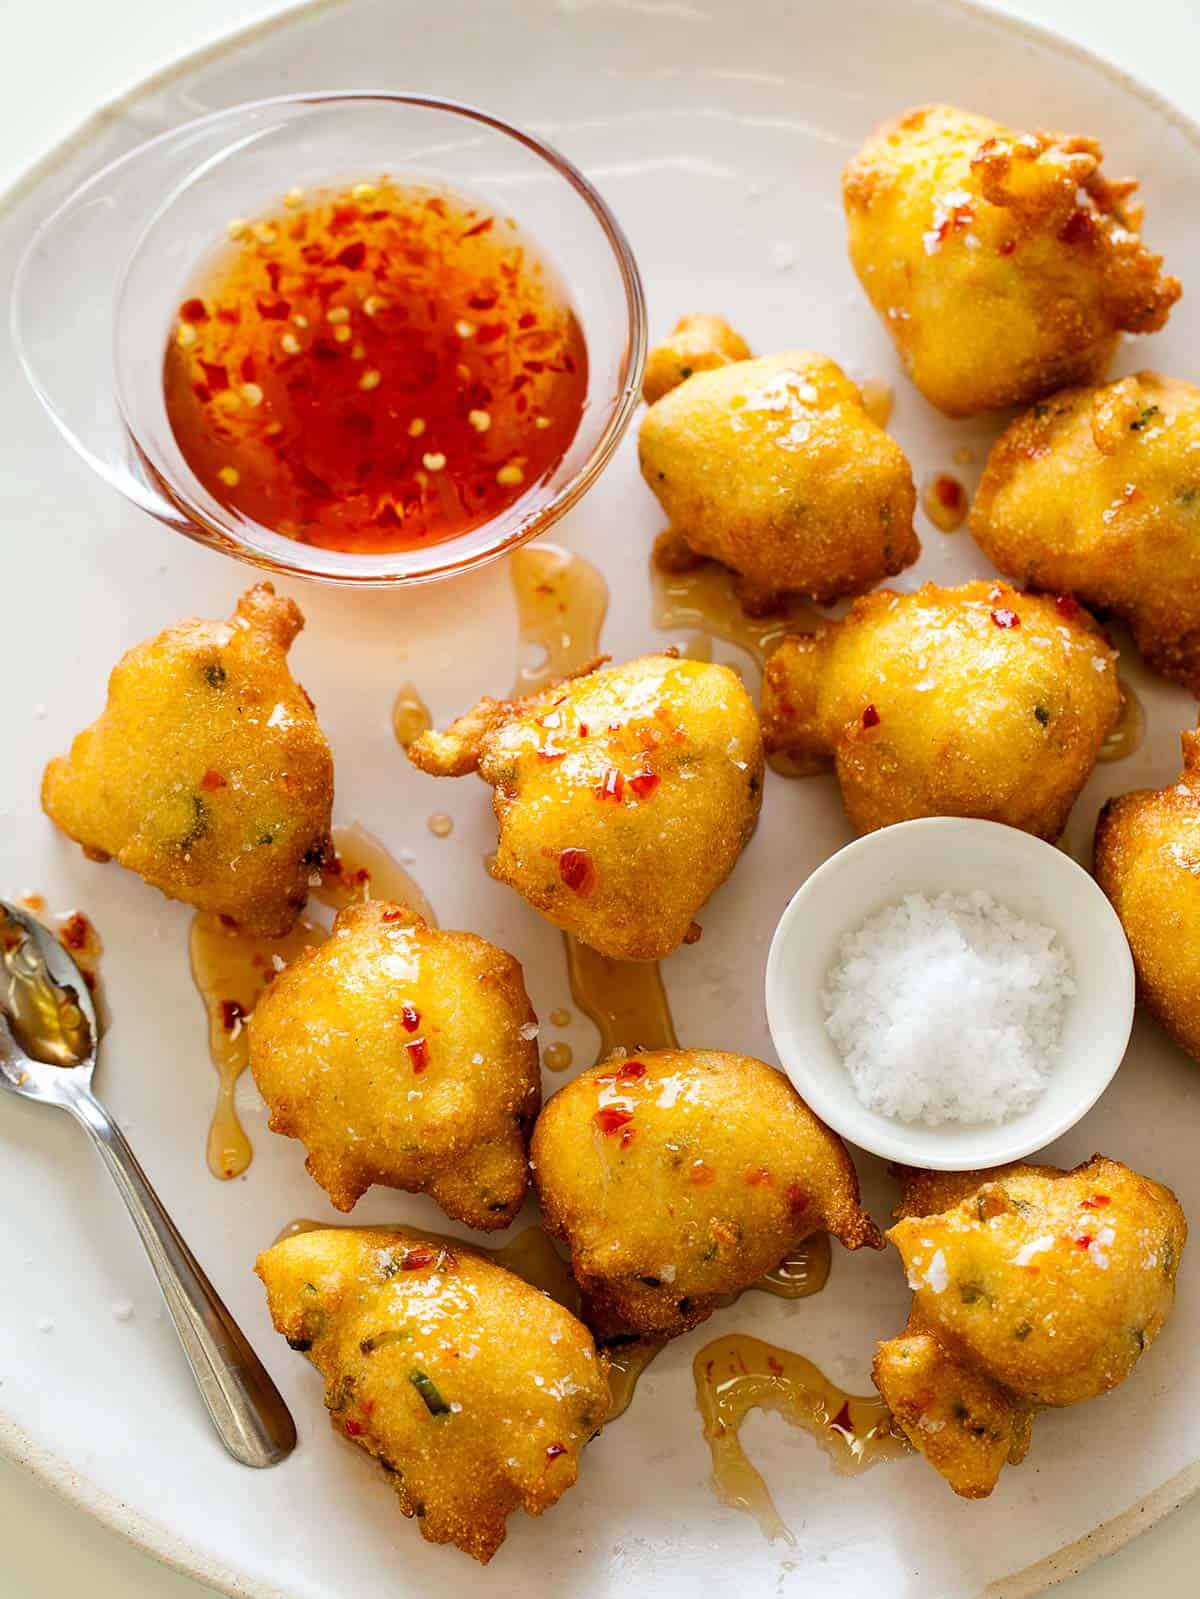 Air Fryer Hush Puppies (Easy Recipe) - Insanely Good